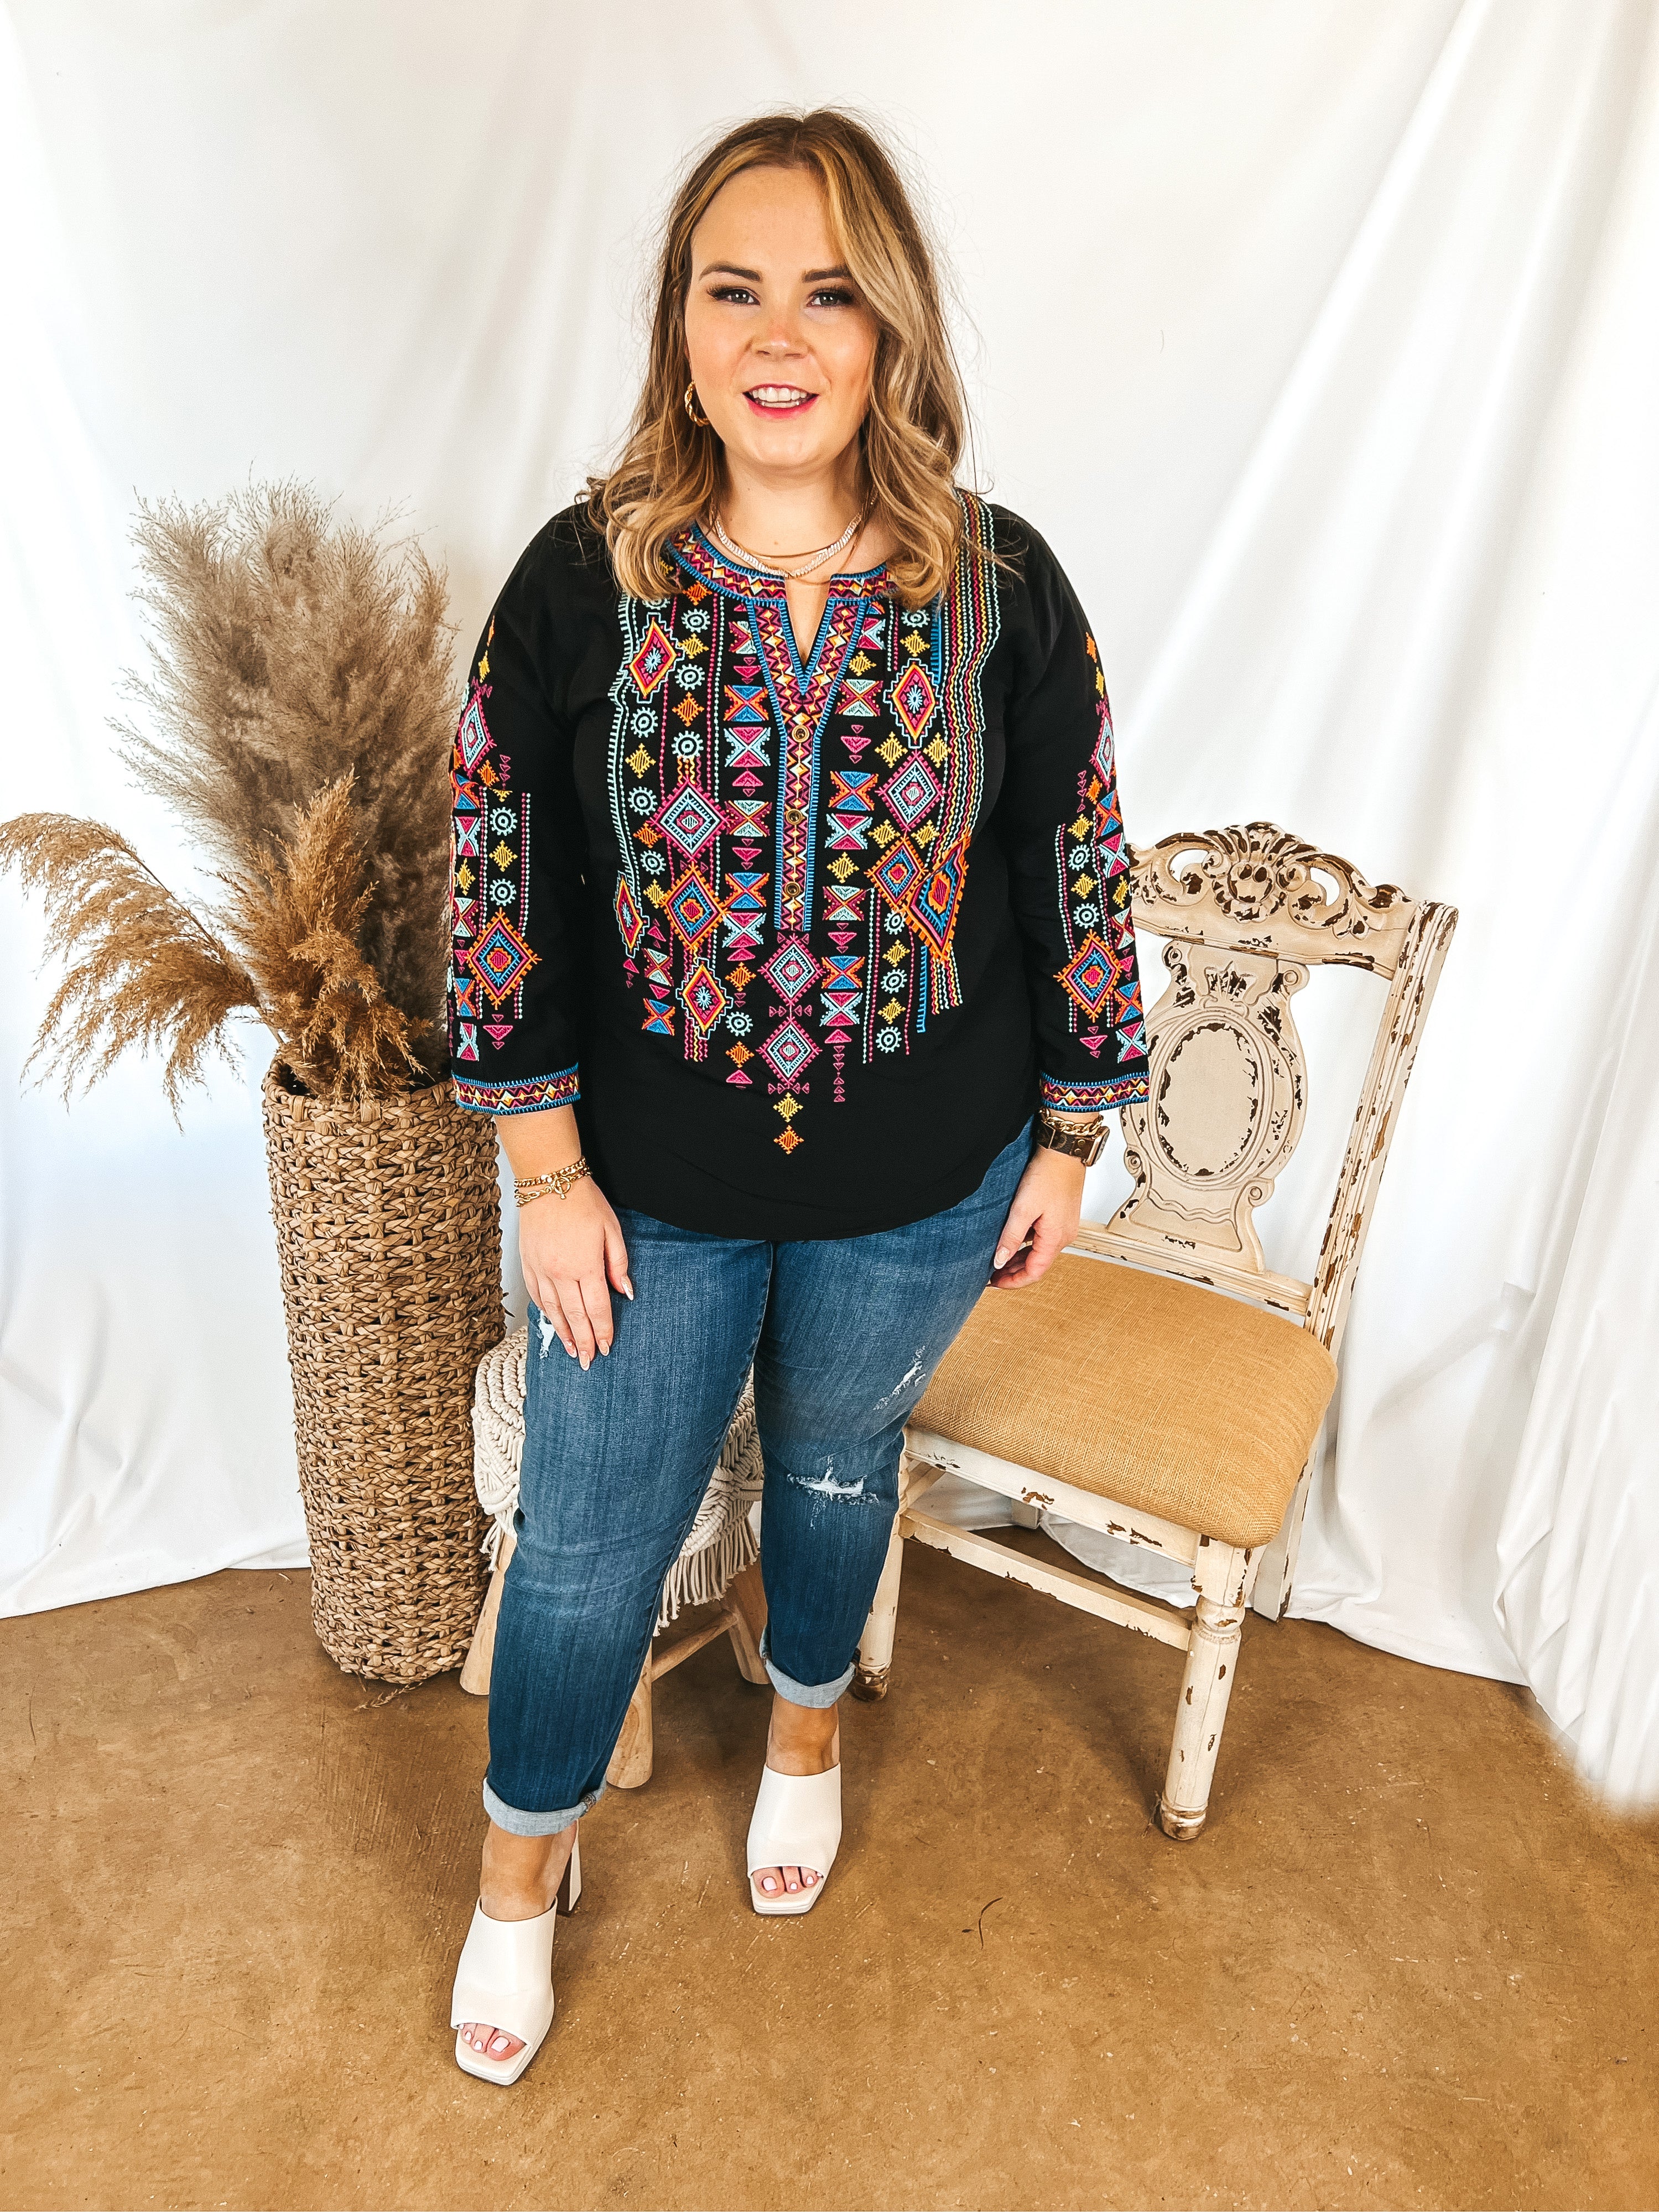 Spring Fling 3/4 Sleeve Aztec Print Embroidered Top with Notched Neck in Black - Giddy Up Glamour Boutique